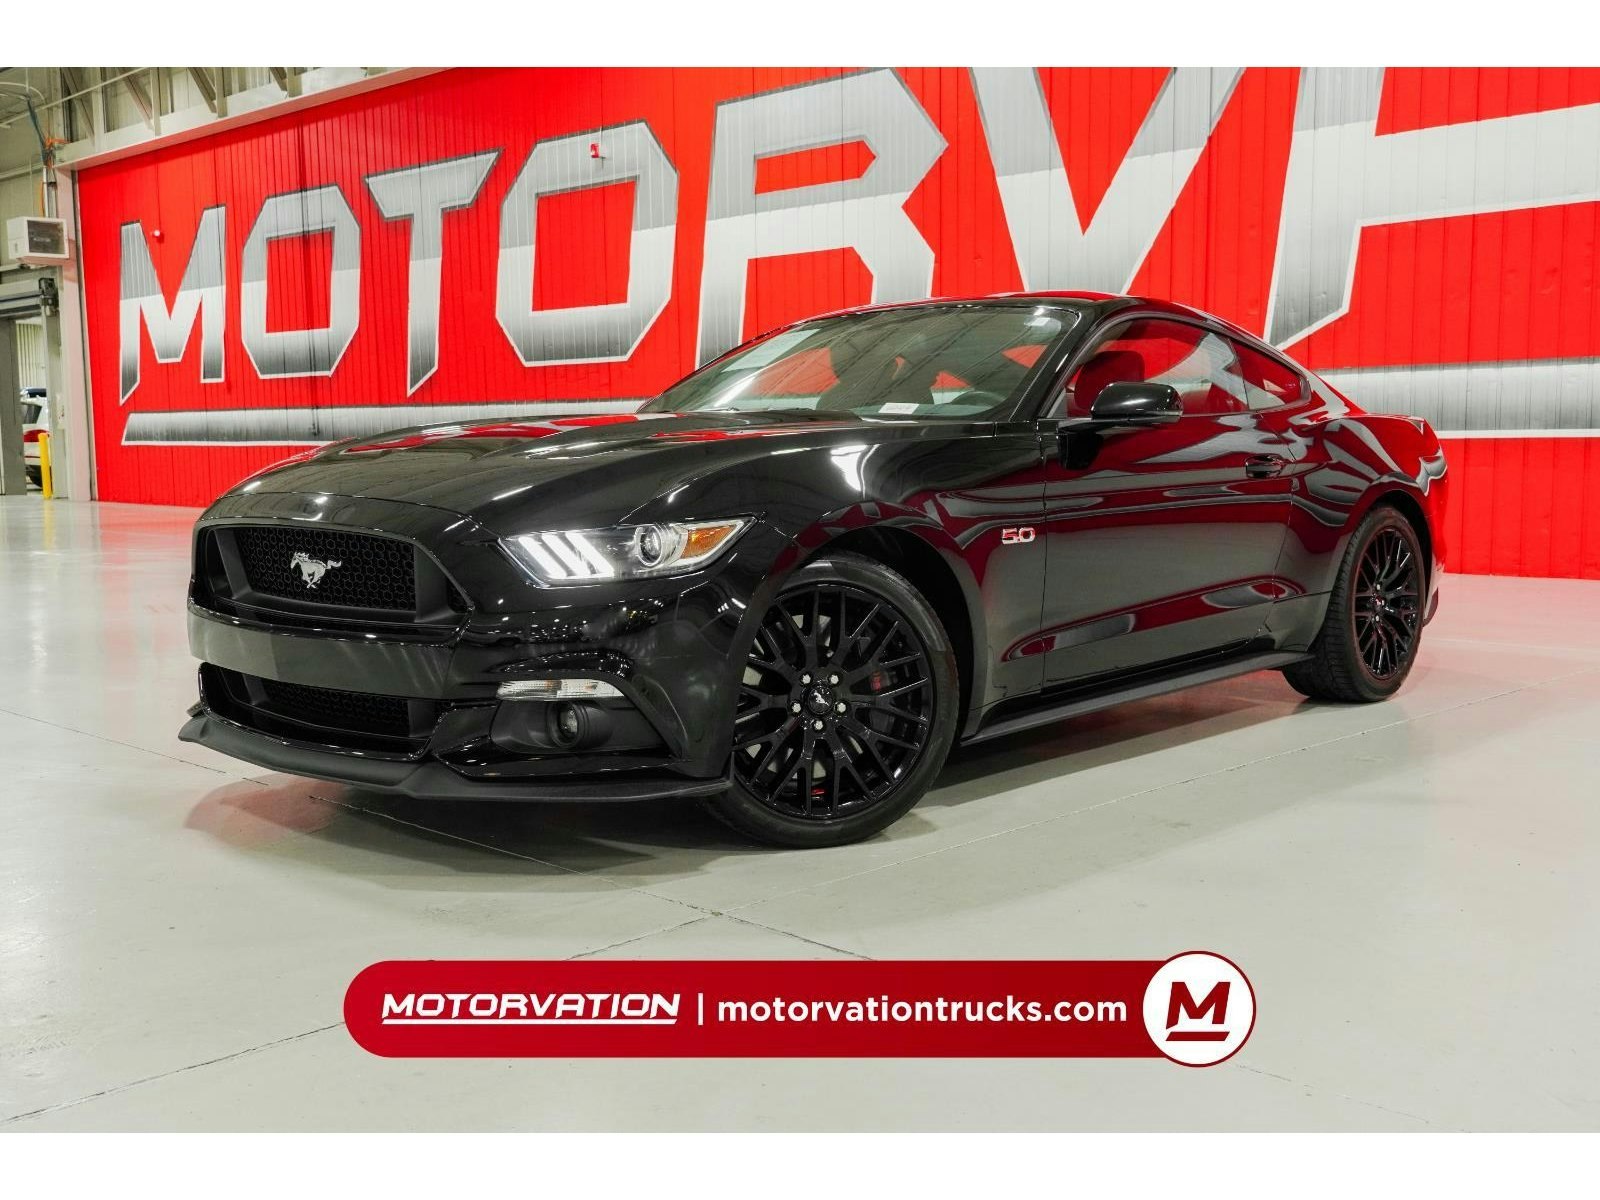 2015 Ford Mustang GT (6249) Main Image